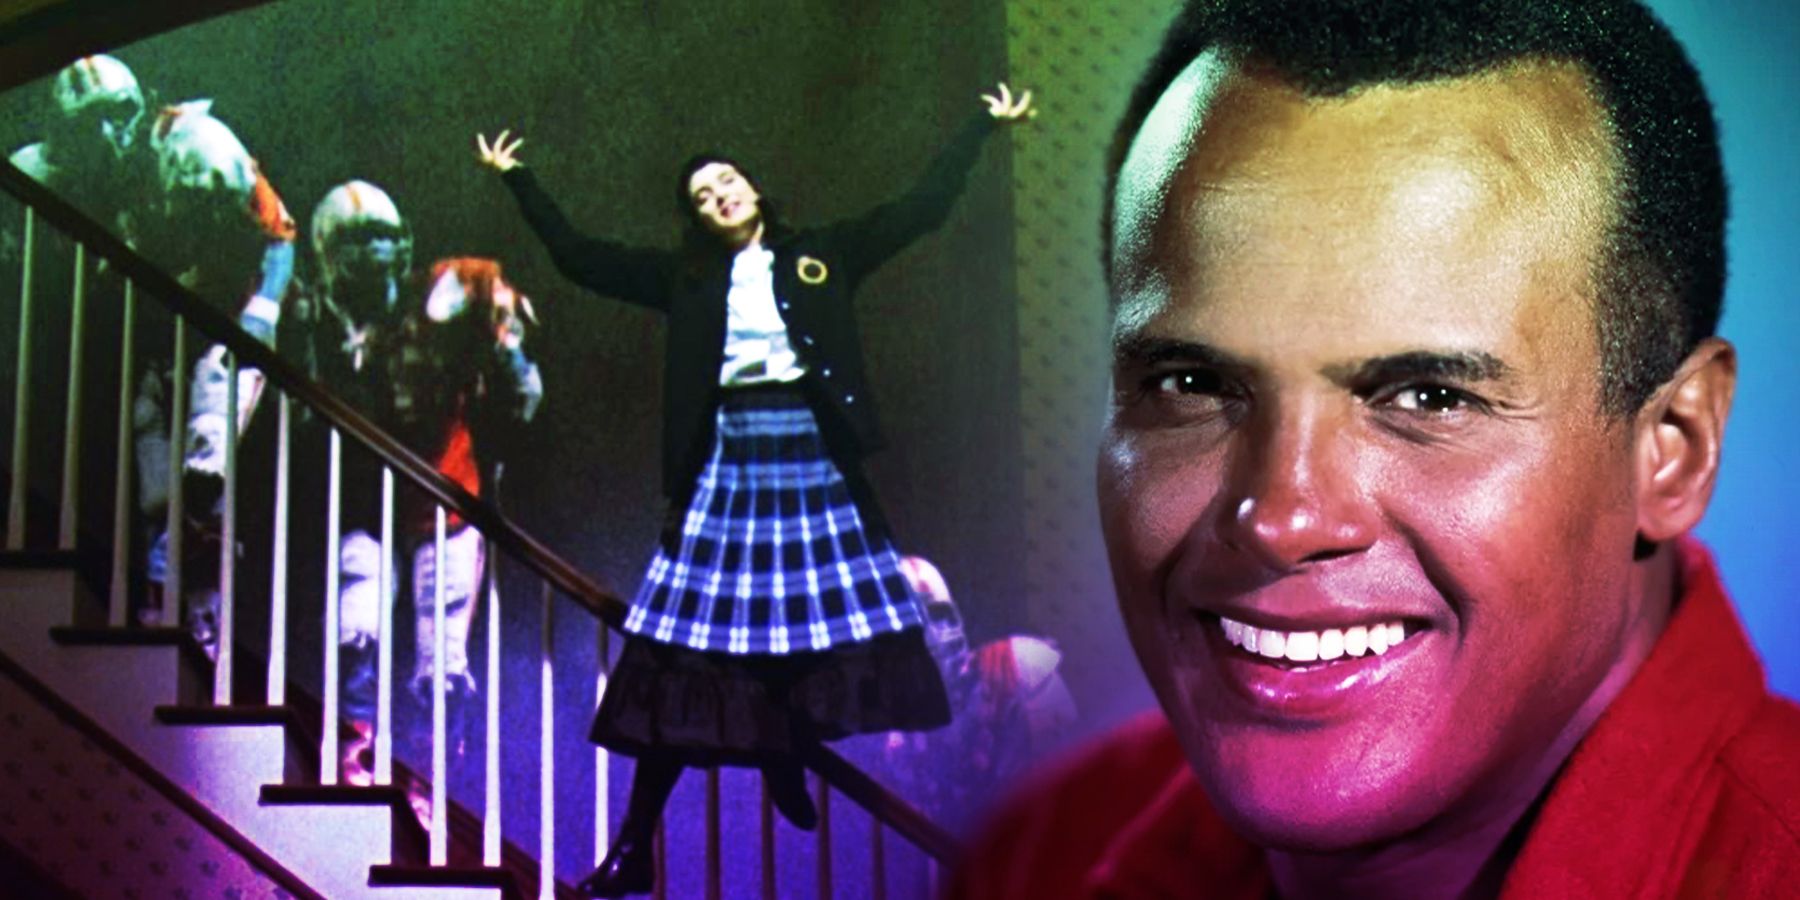 Harry Belafonte next to an image of Beetlejuice's zombie football players on the stairs.